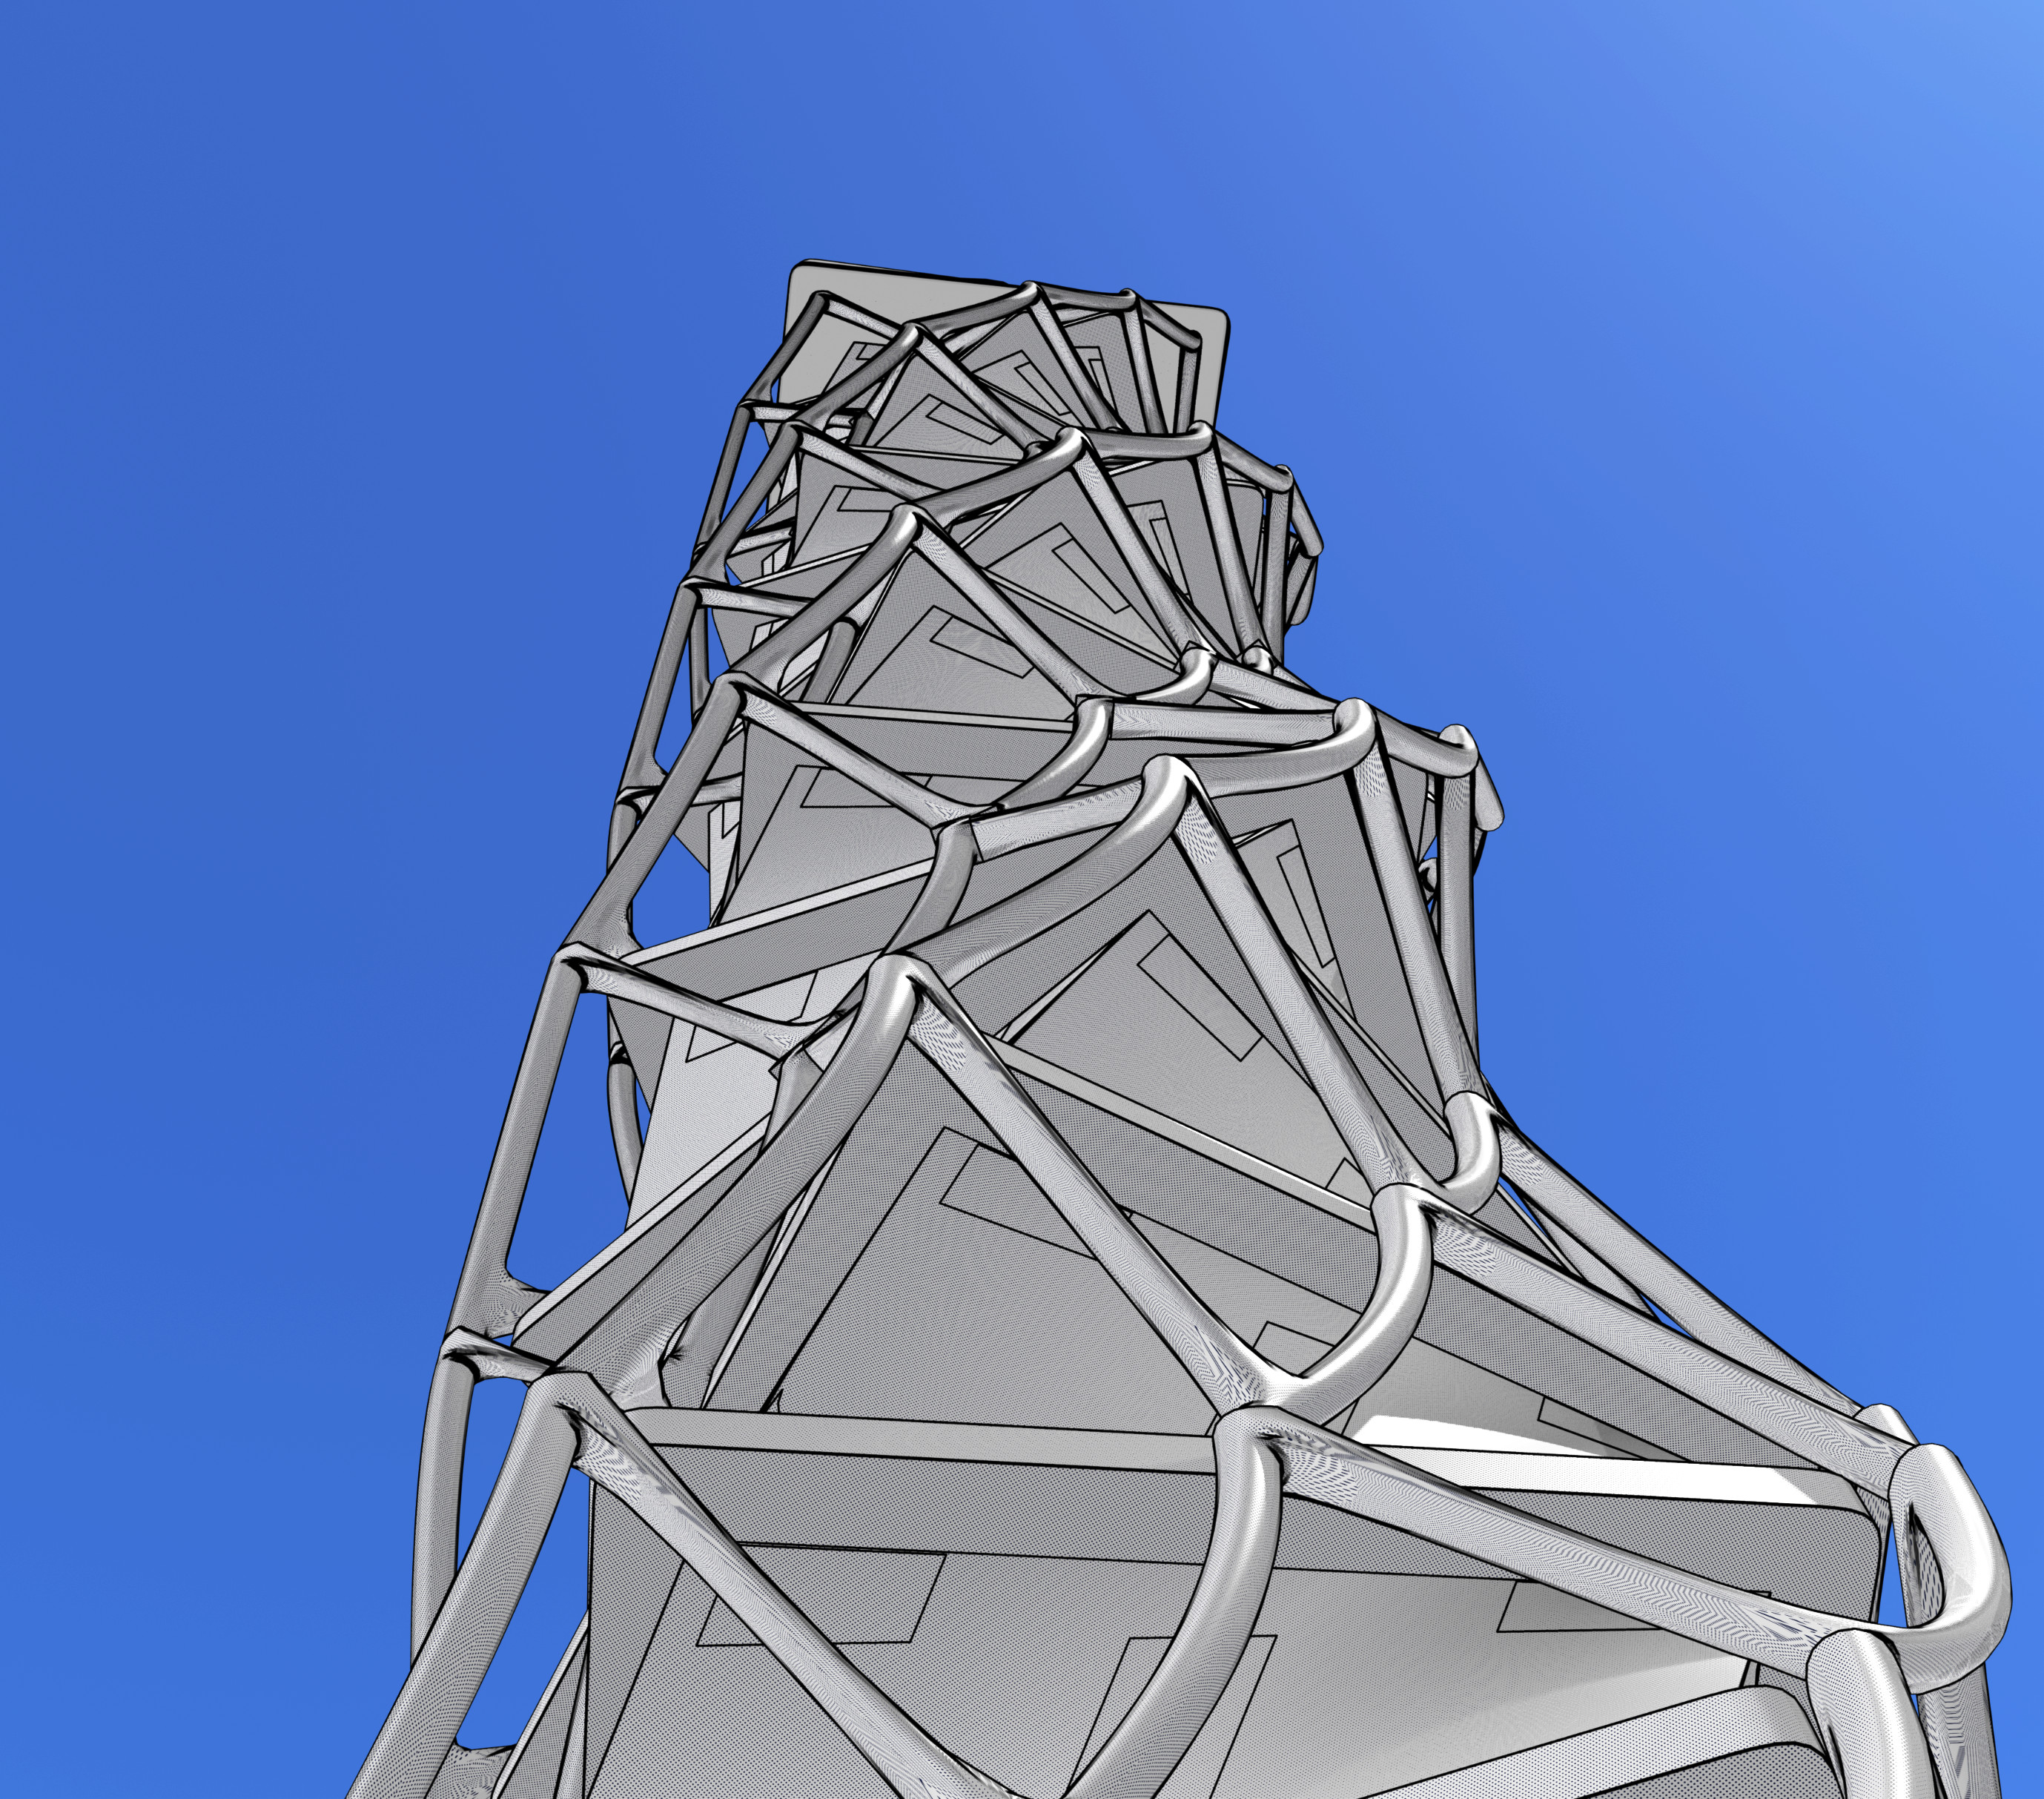 Procedurally-generated twisted tower with procedural external structural grid - worm's eye view - cel edge shader